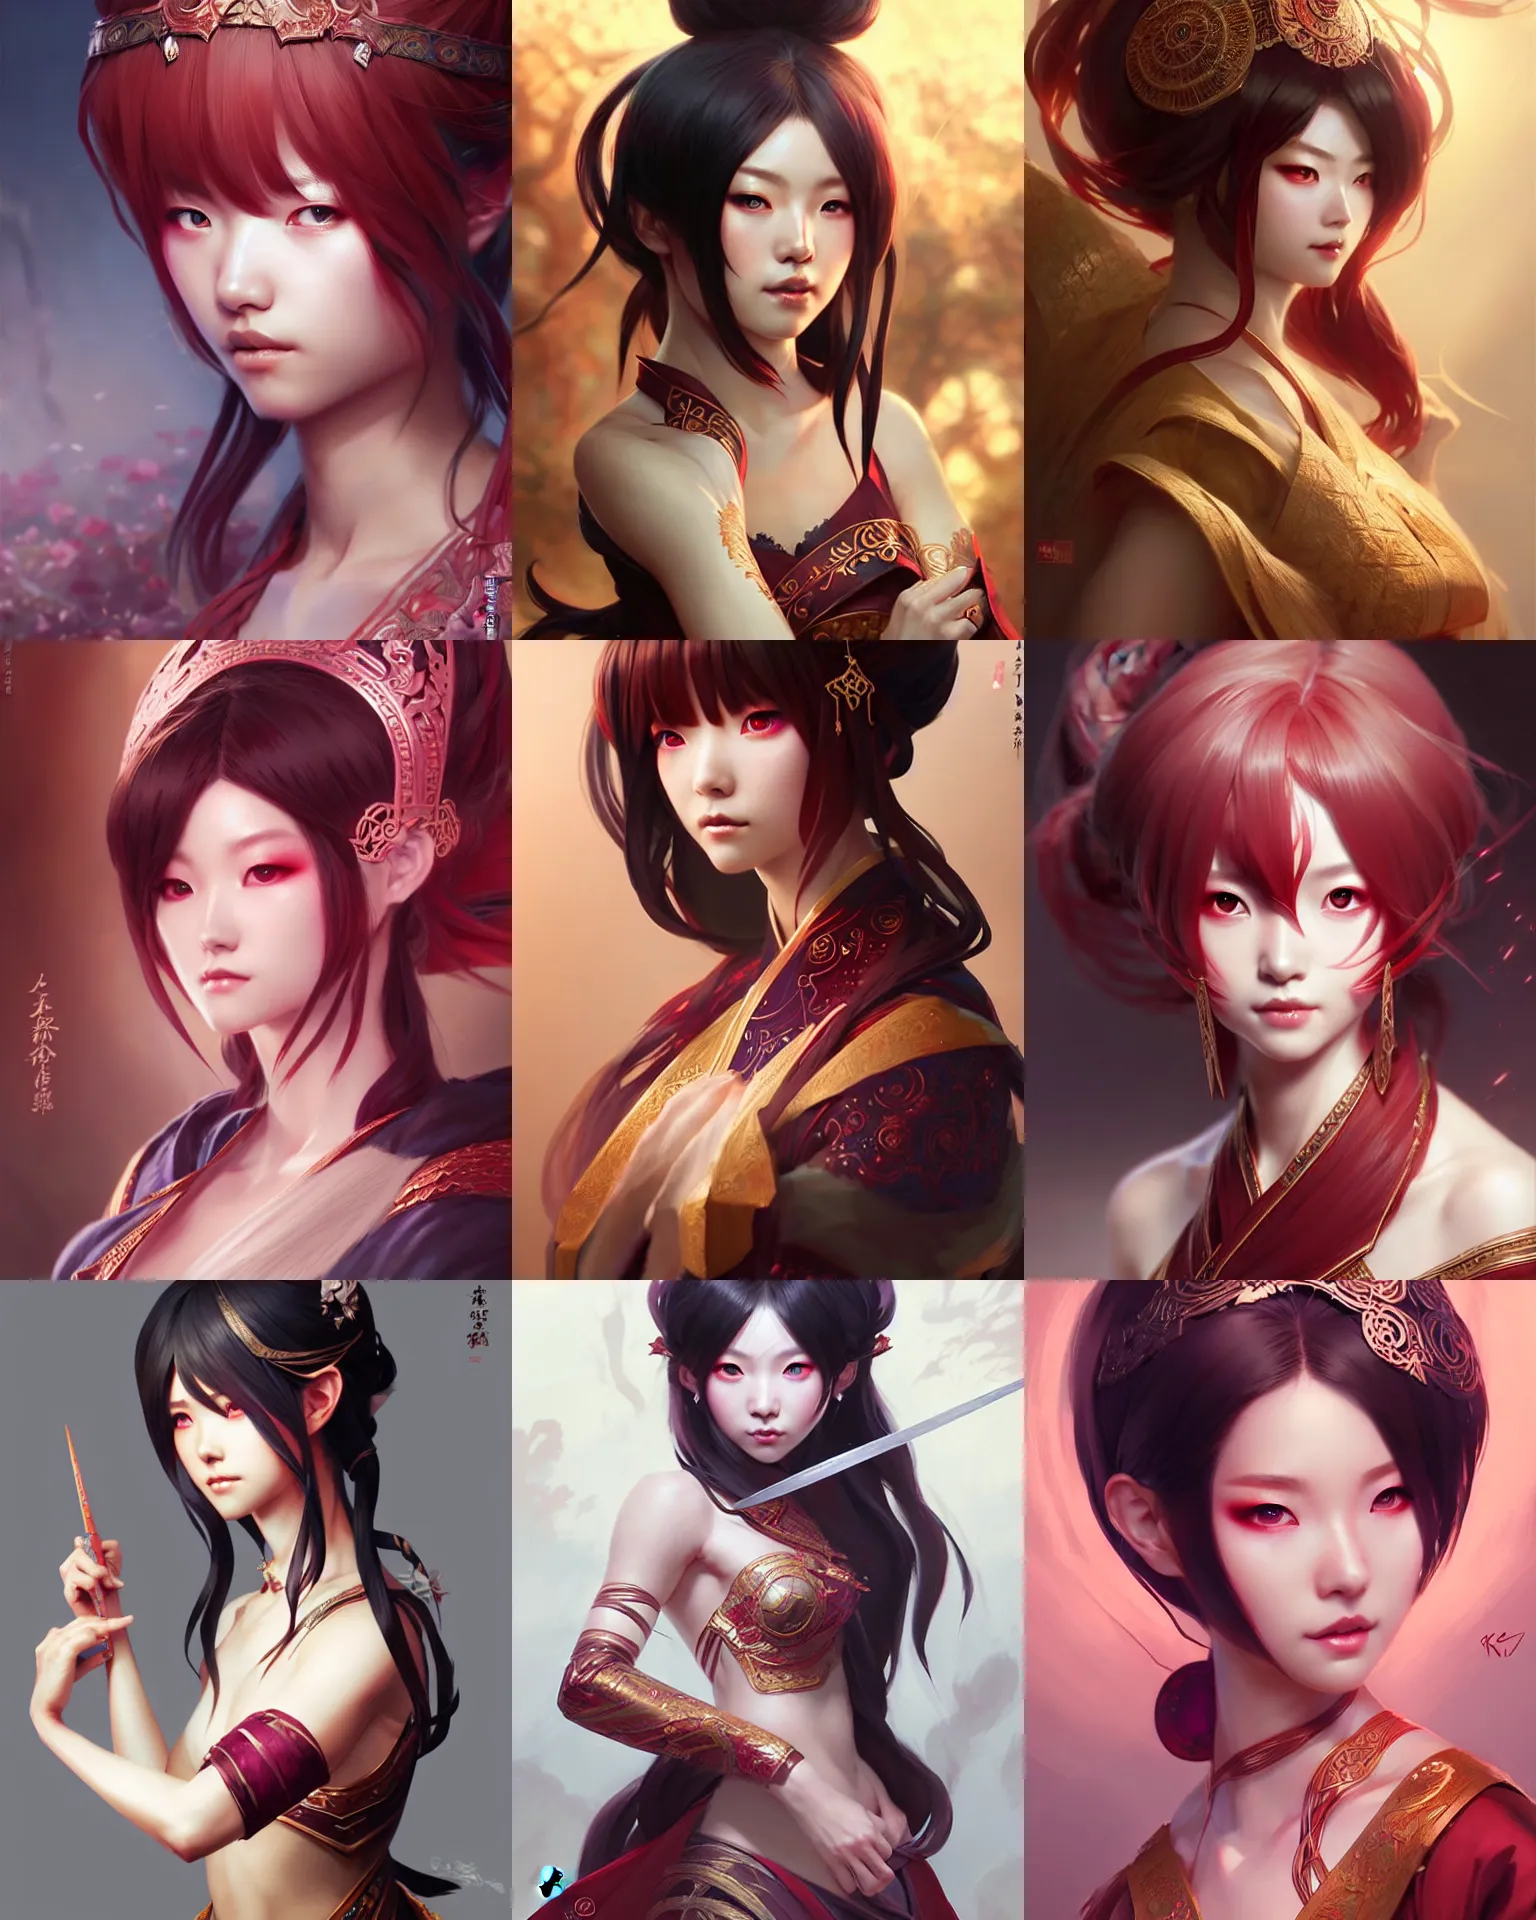 Pin by miko on reference  Anime art tutorial, Art inspiration